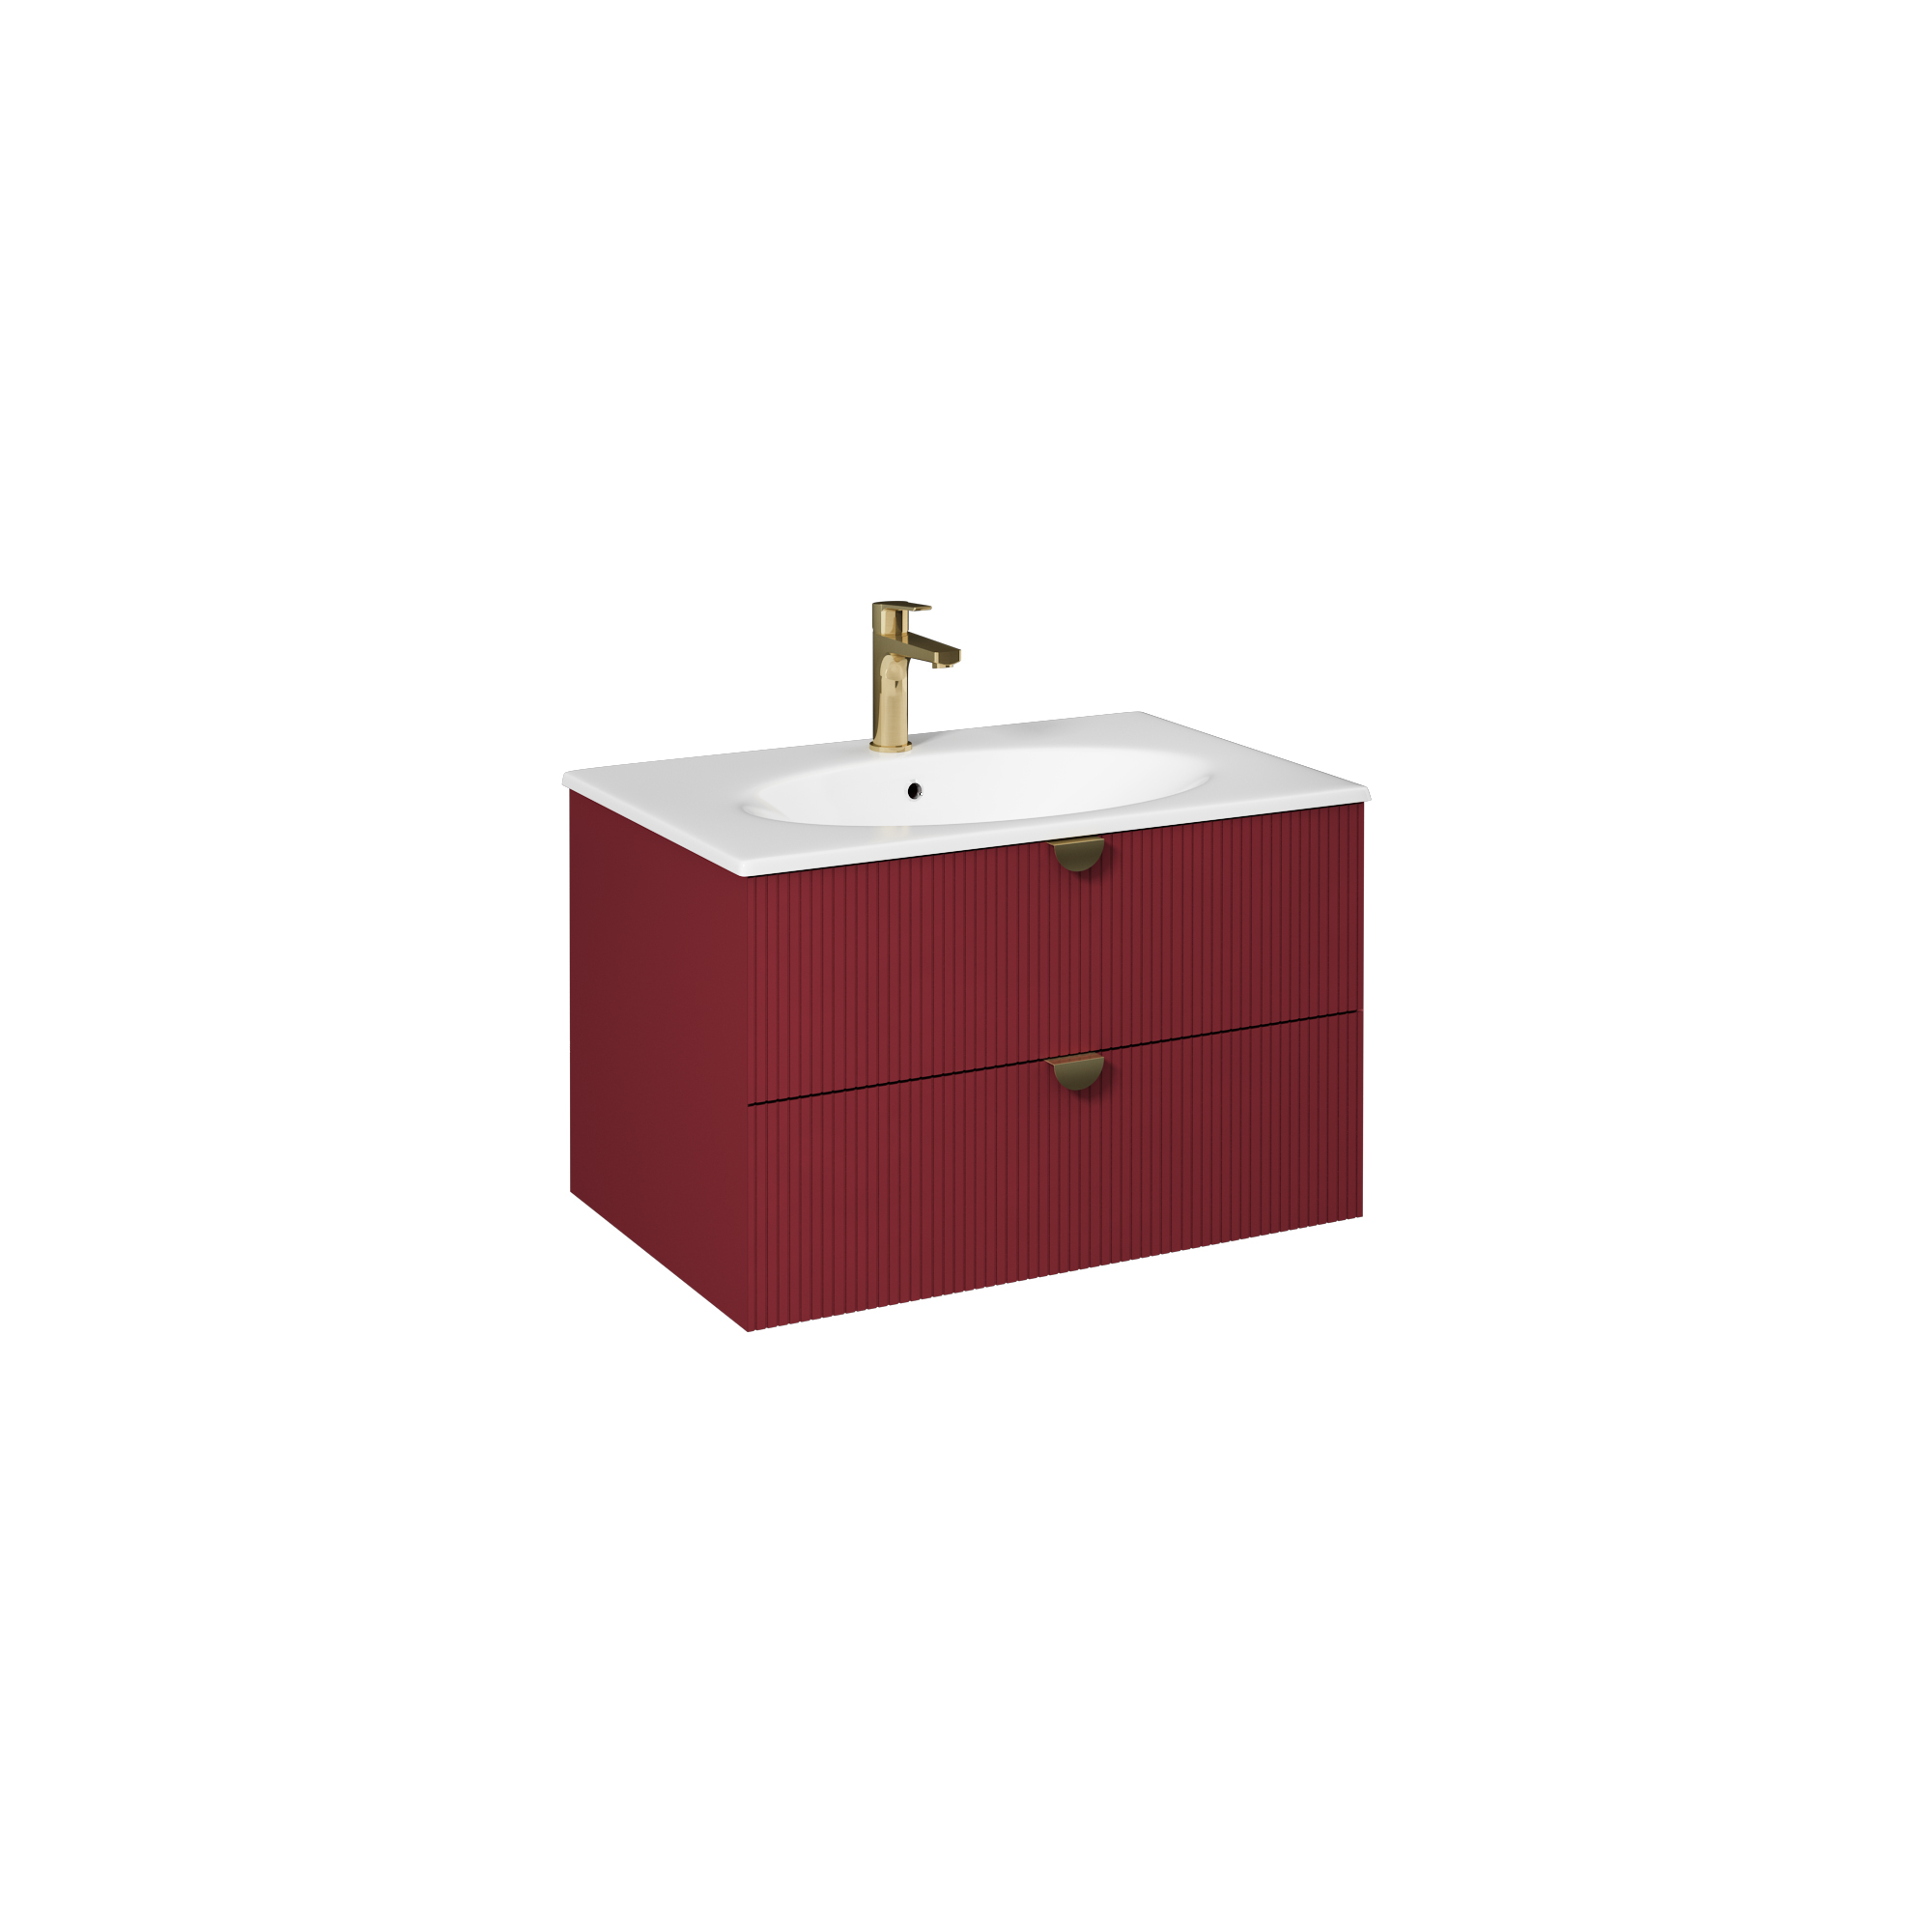 Infinity Washbasin Cabinet, Ruby Red 31"